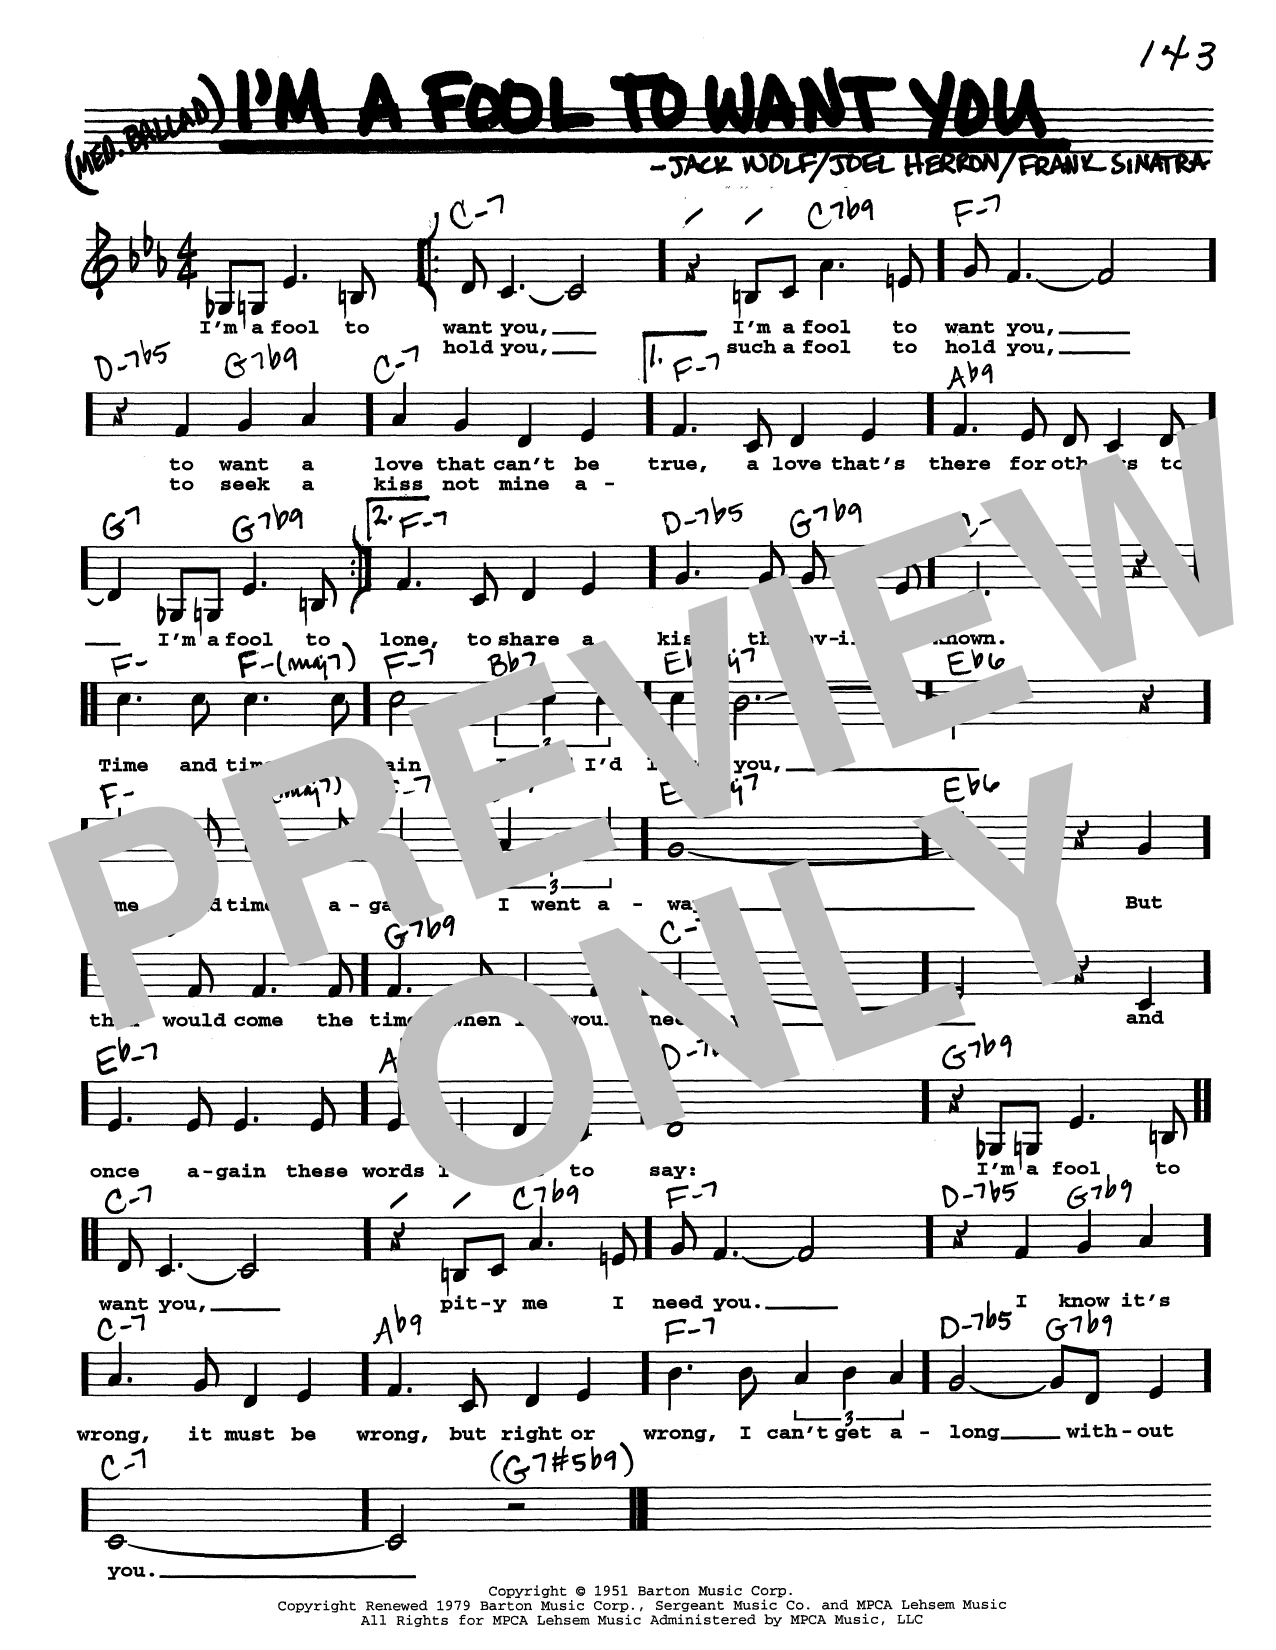 Frank Sinatra I'm A Fool To Want You (Low Voice) sheet music notes printable PDF score